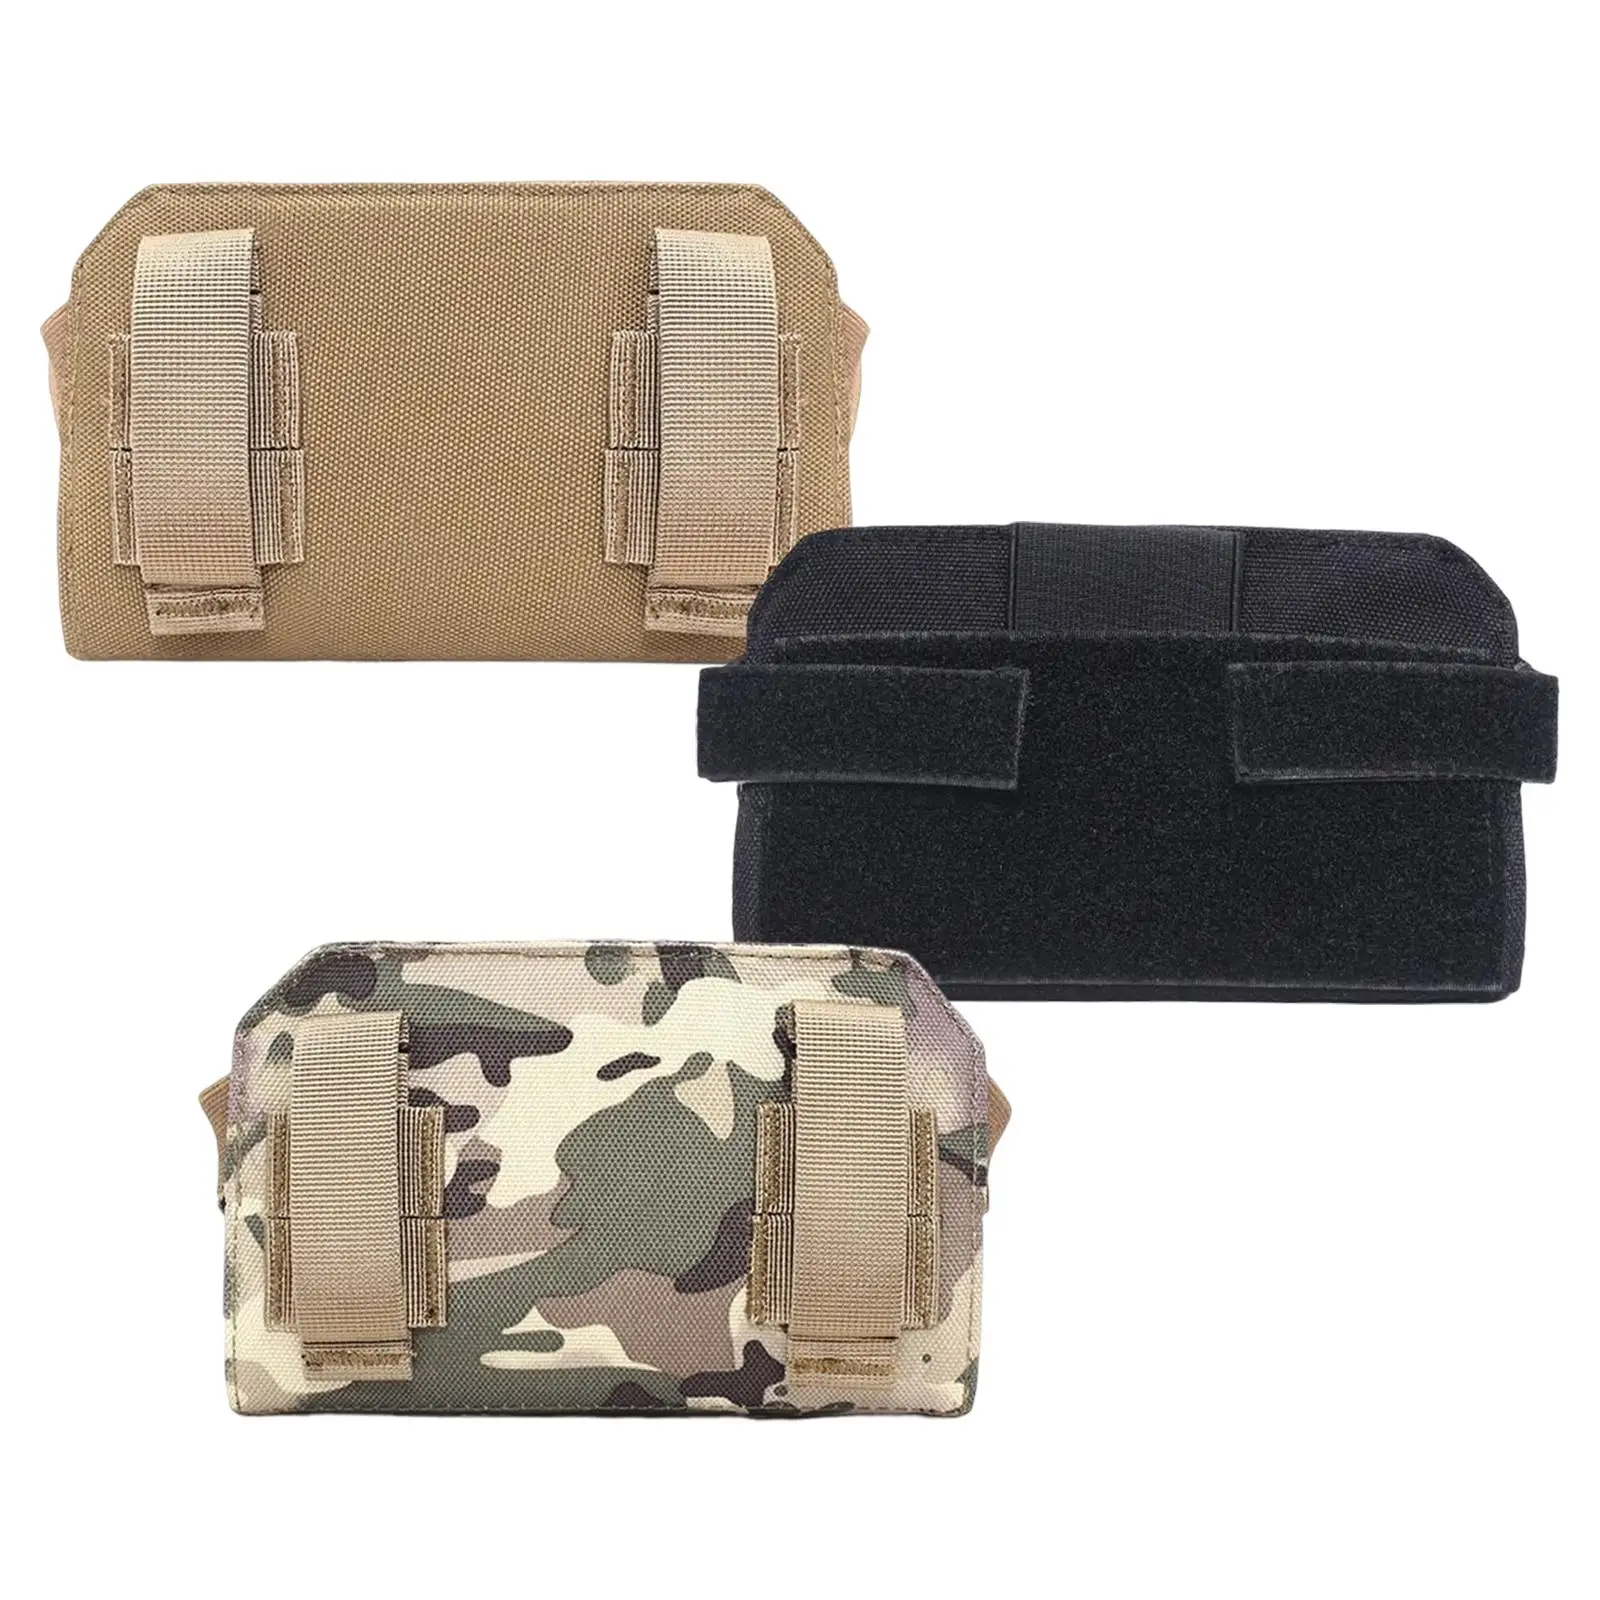 Chest Sundries Bag Map Bag Molle Quick Release Molle Bag Holster Shoulder Strap Pouch Admin Pouch for Hunting Shooting